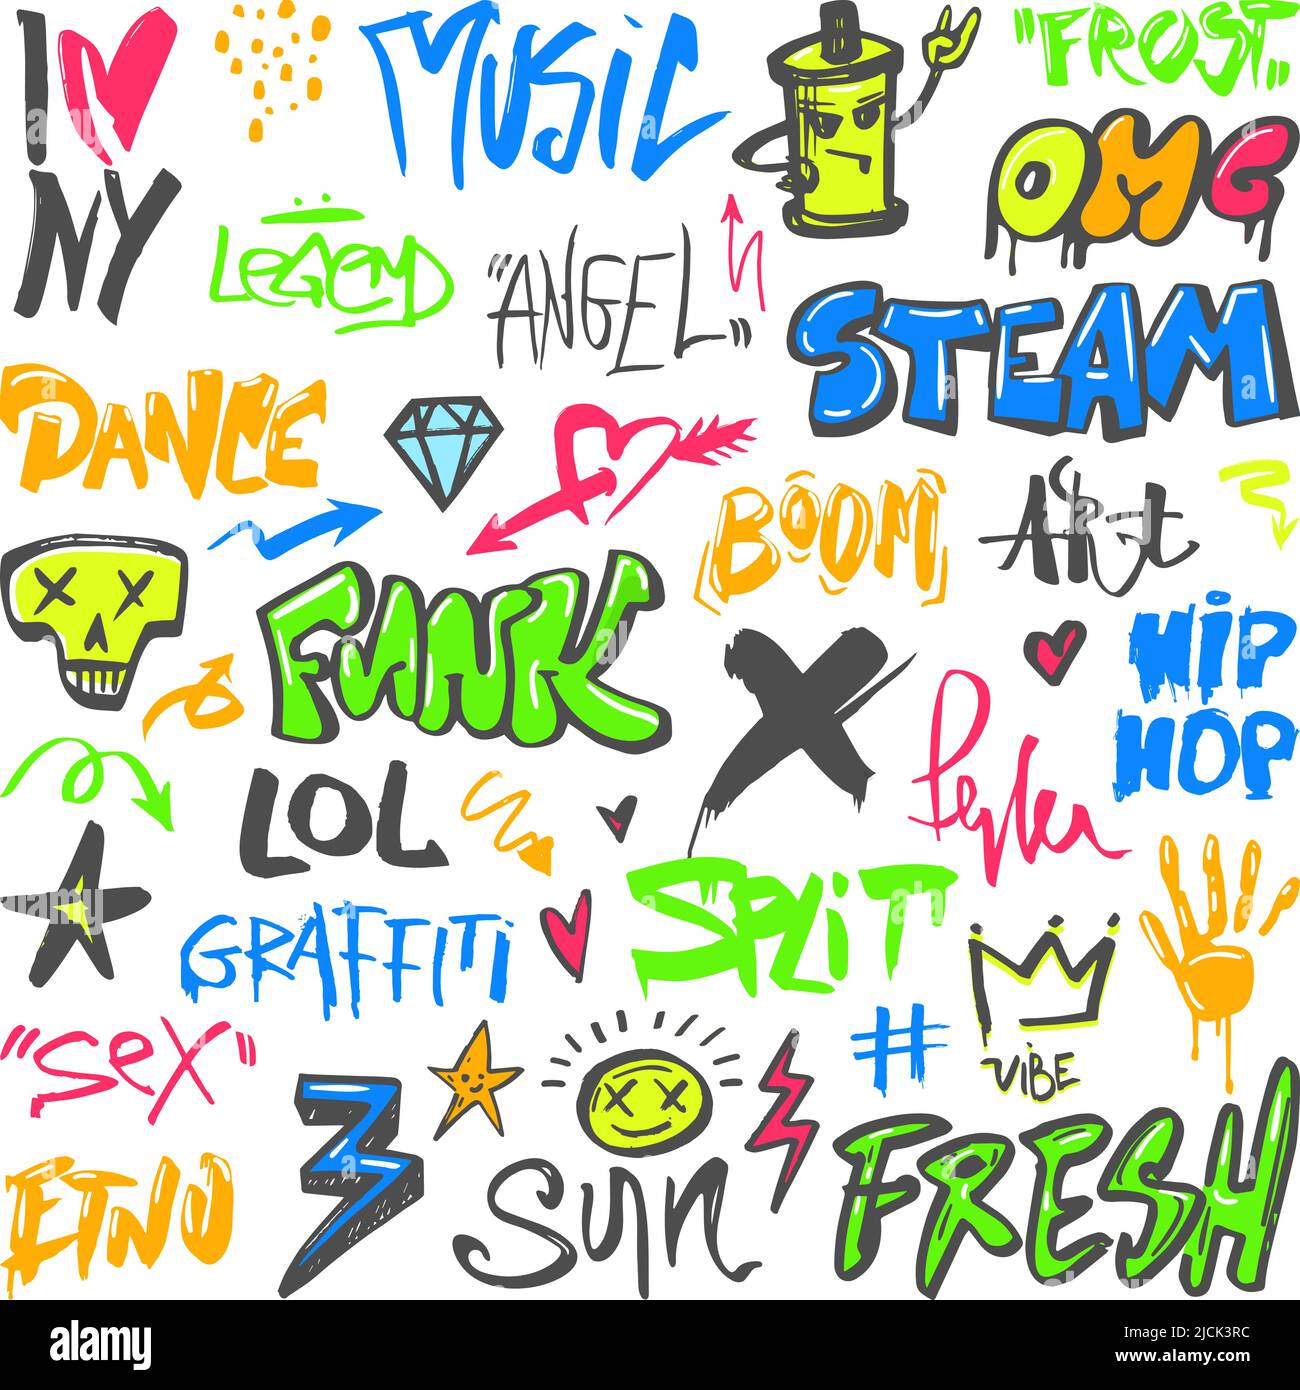 Street graffiti. Urban walls spray graphics, funny scratched elements and letters. Scribble and doodle phrases, ink prints and marker tags neoteric Stock Vector